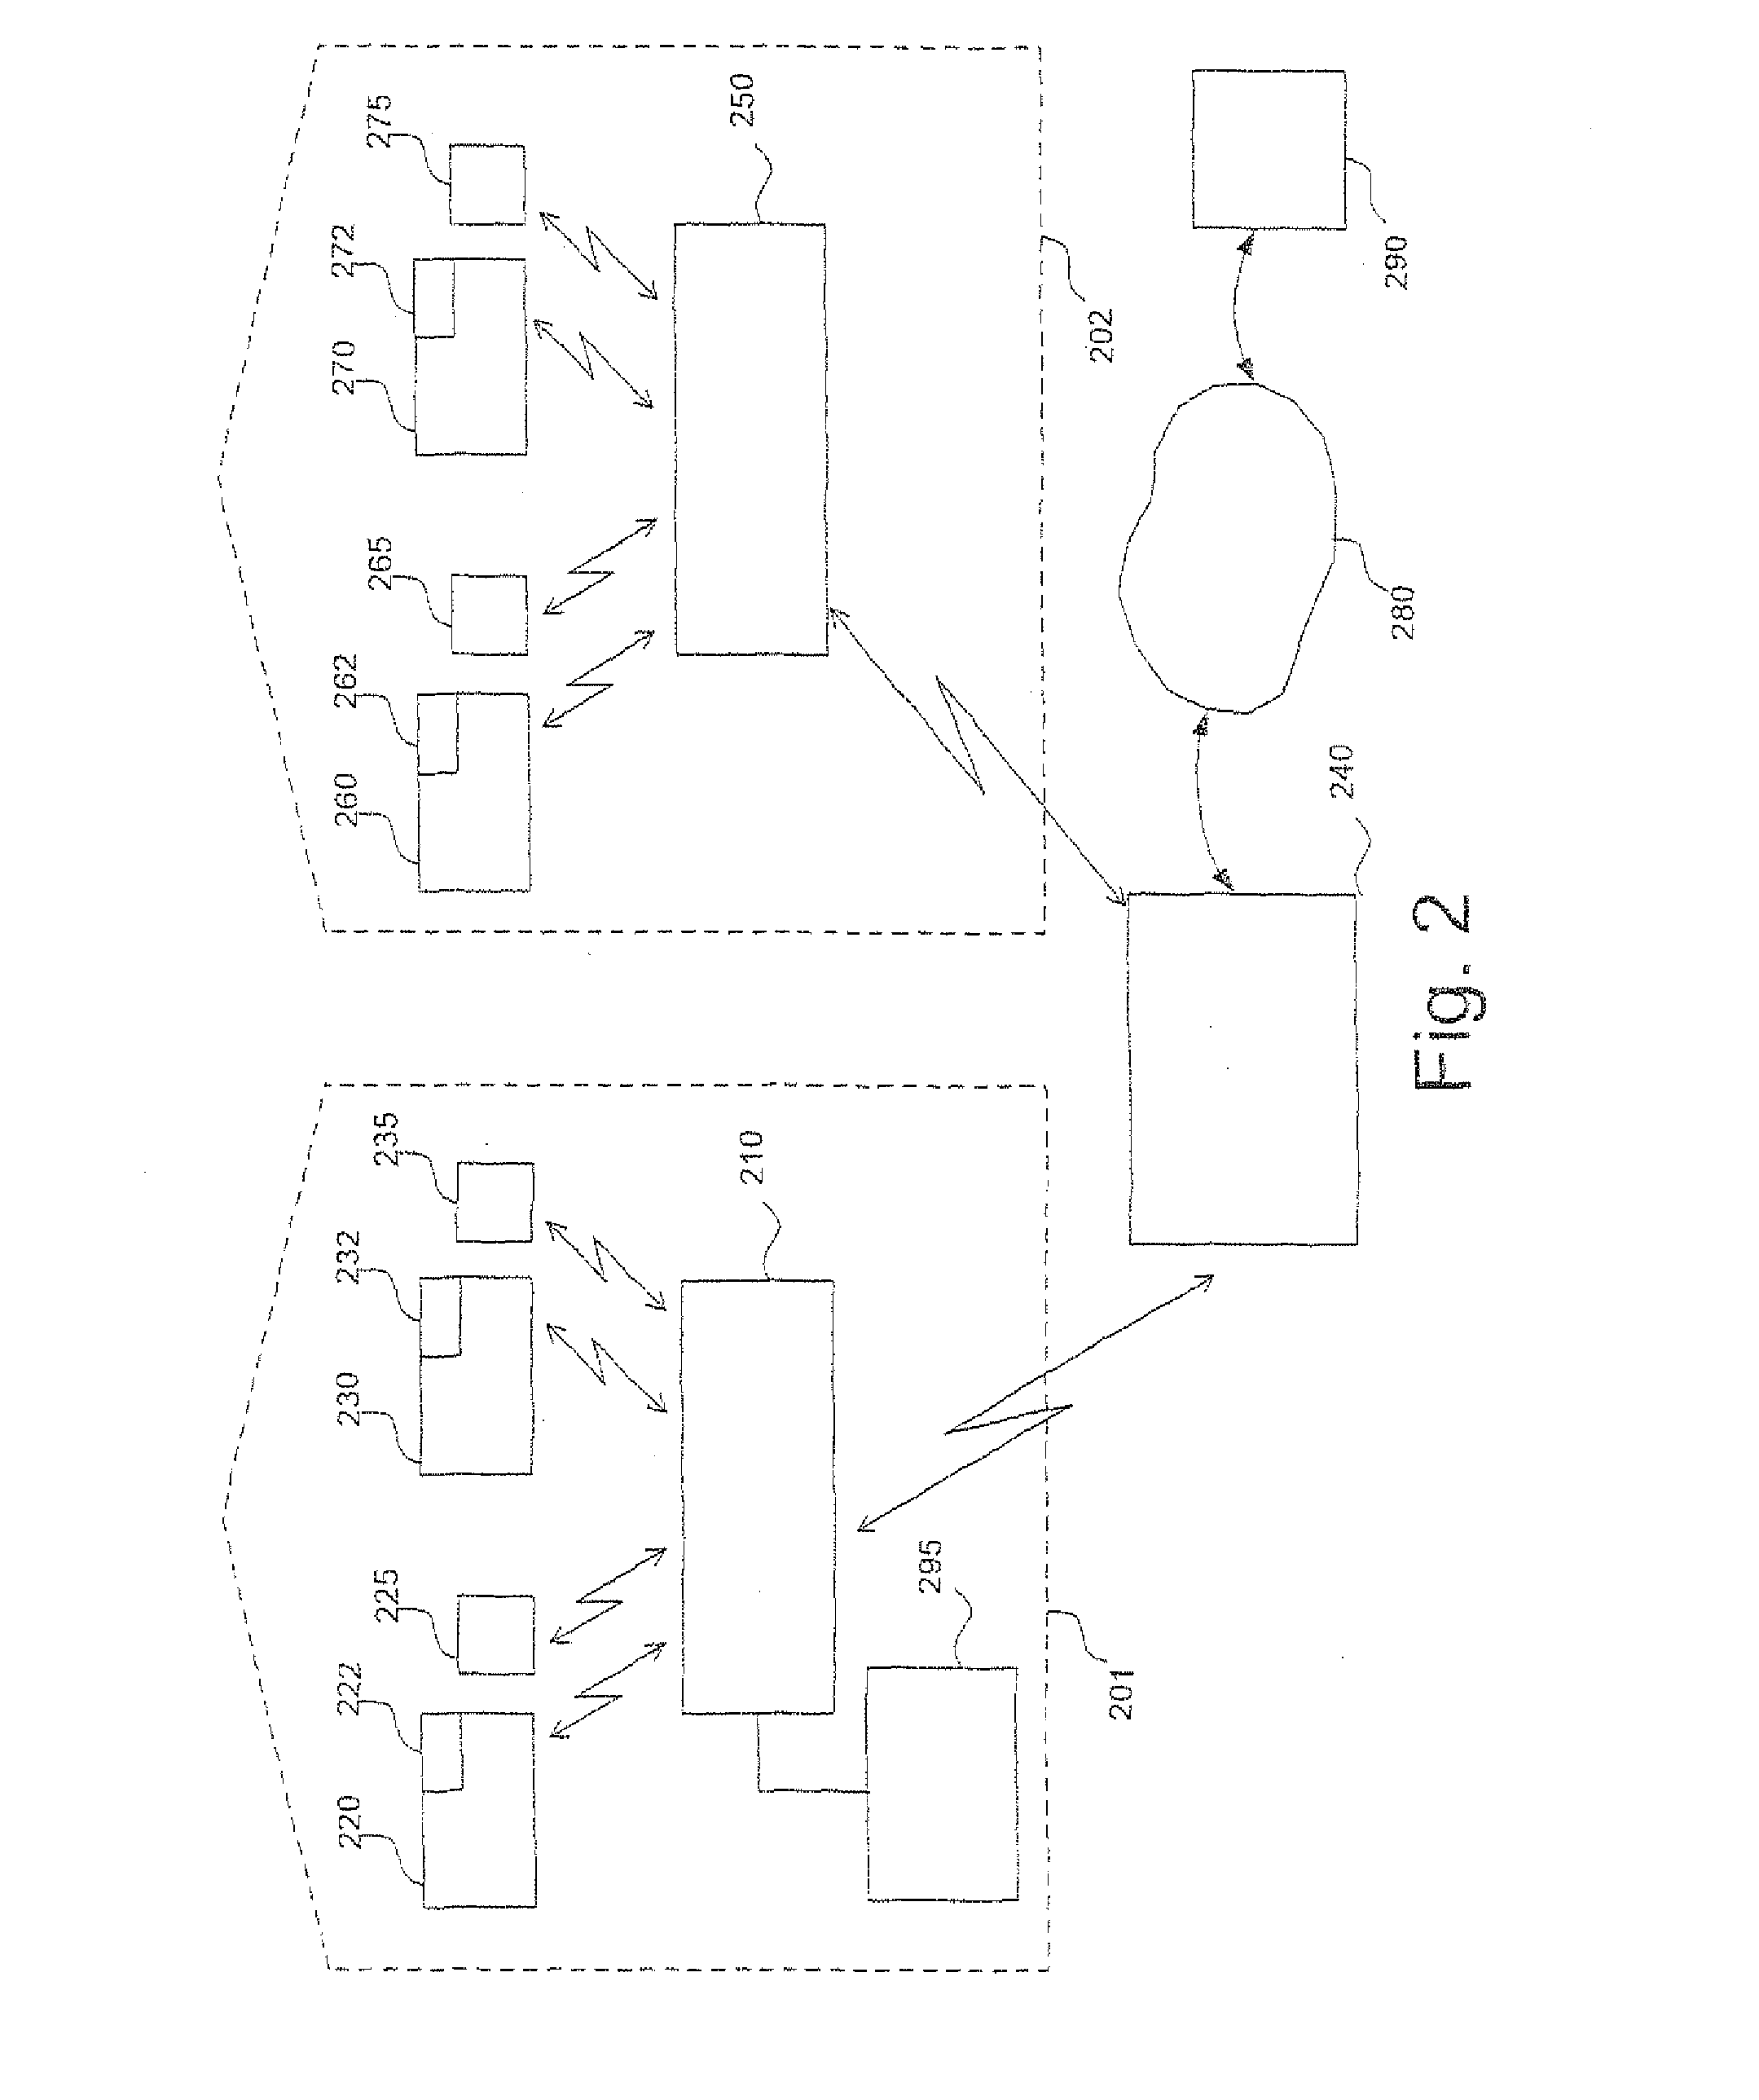 System for the central control of operational devices